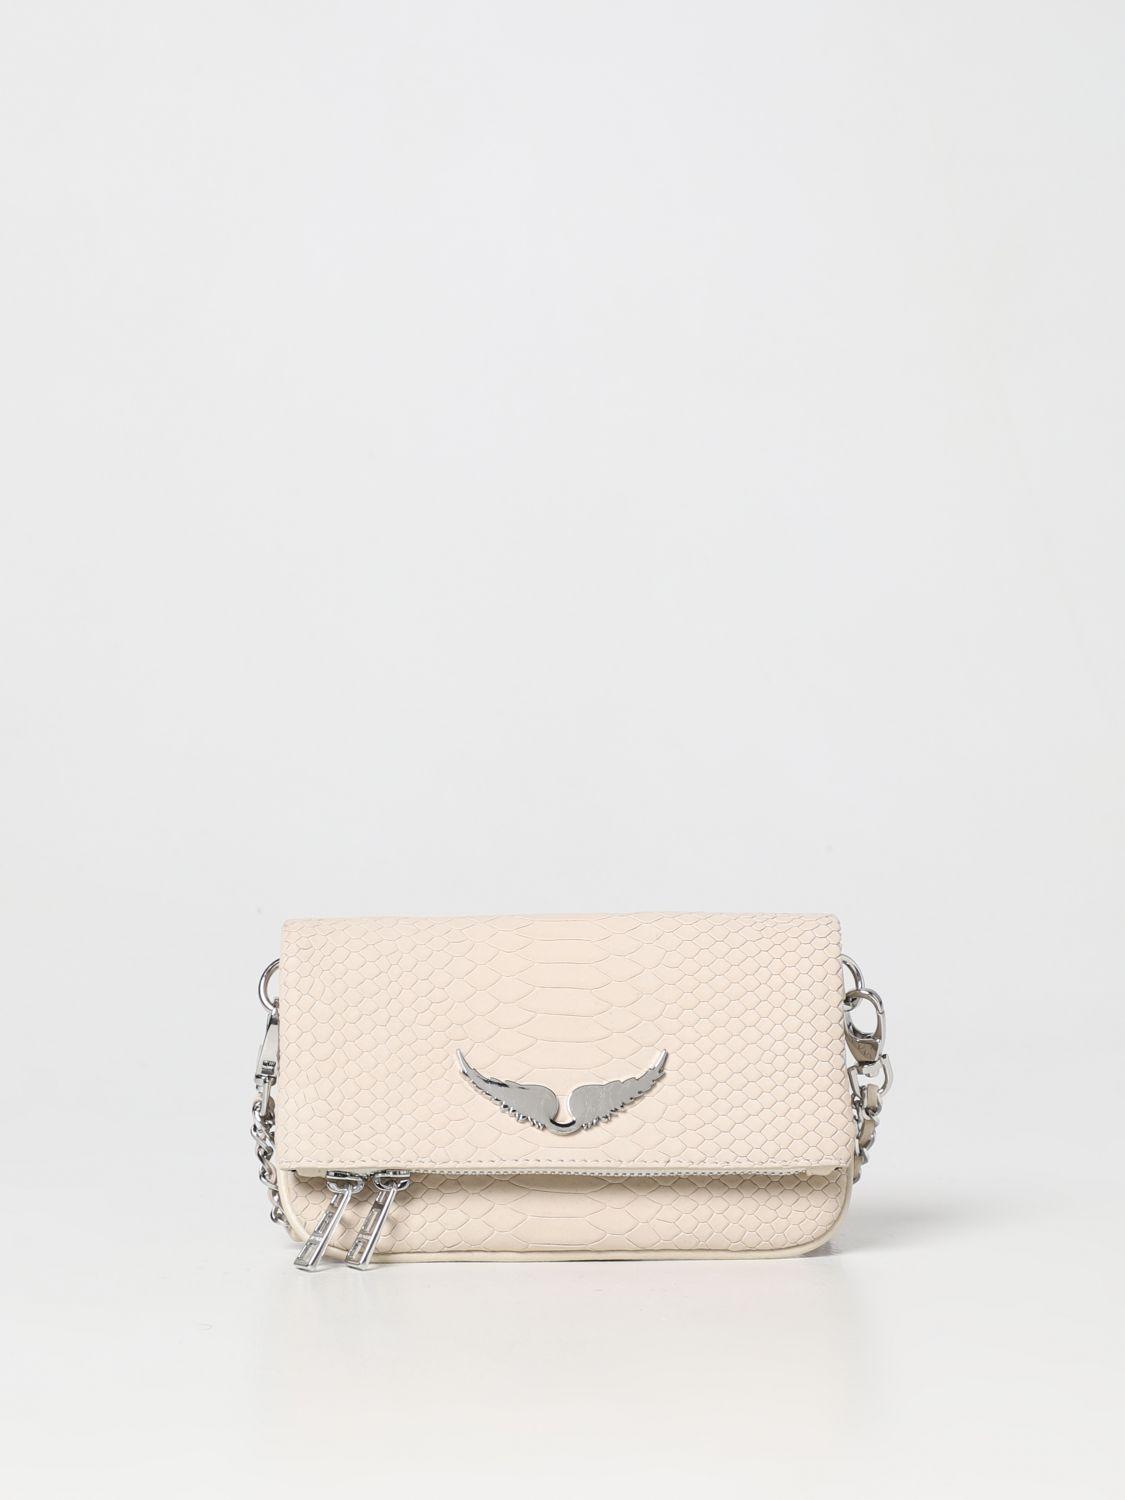 Zadig & Voltaire Mini Bag in Natural | Lyst